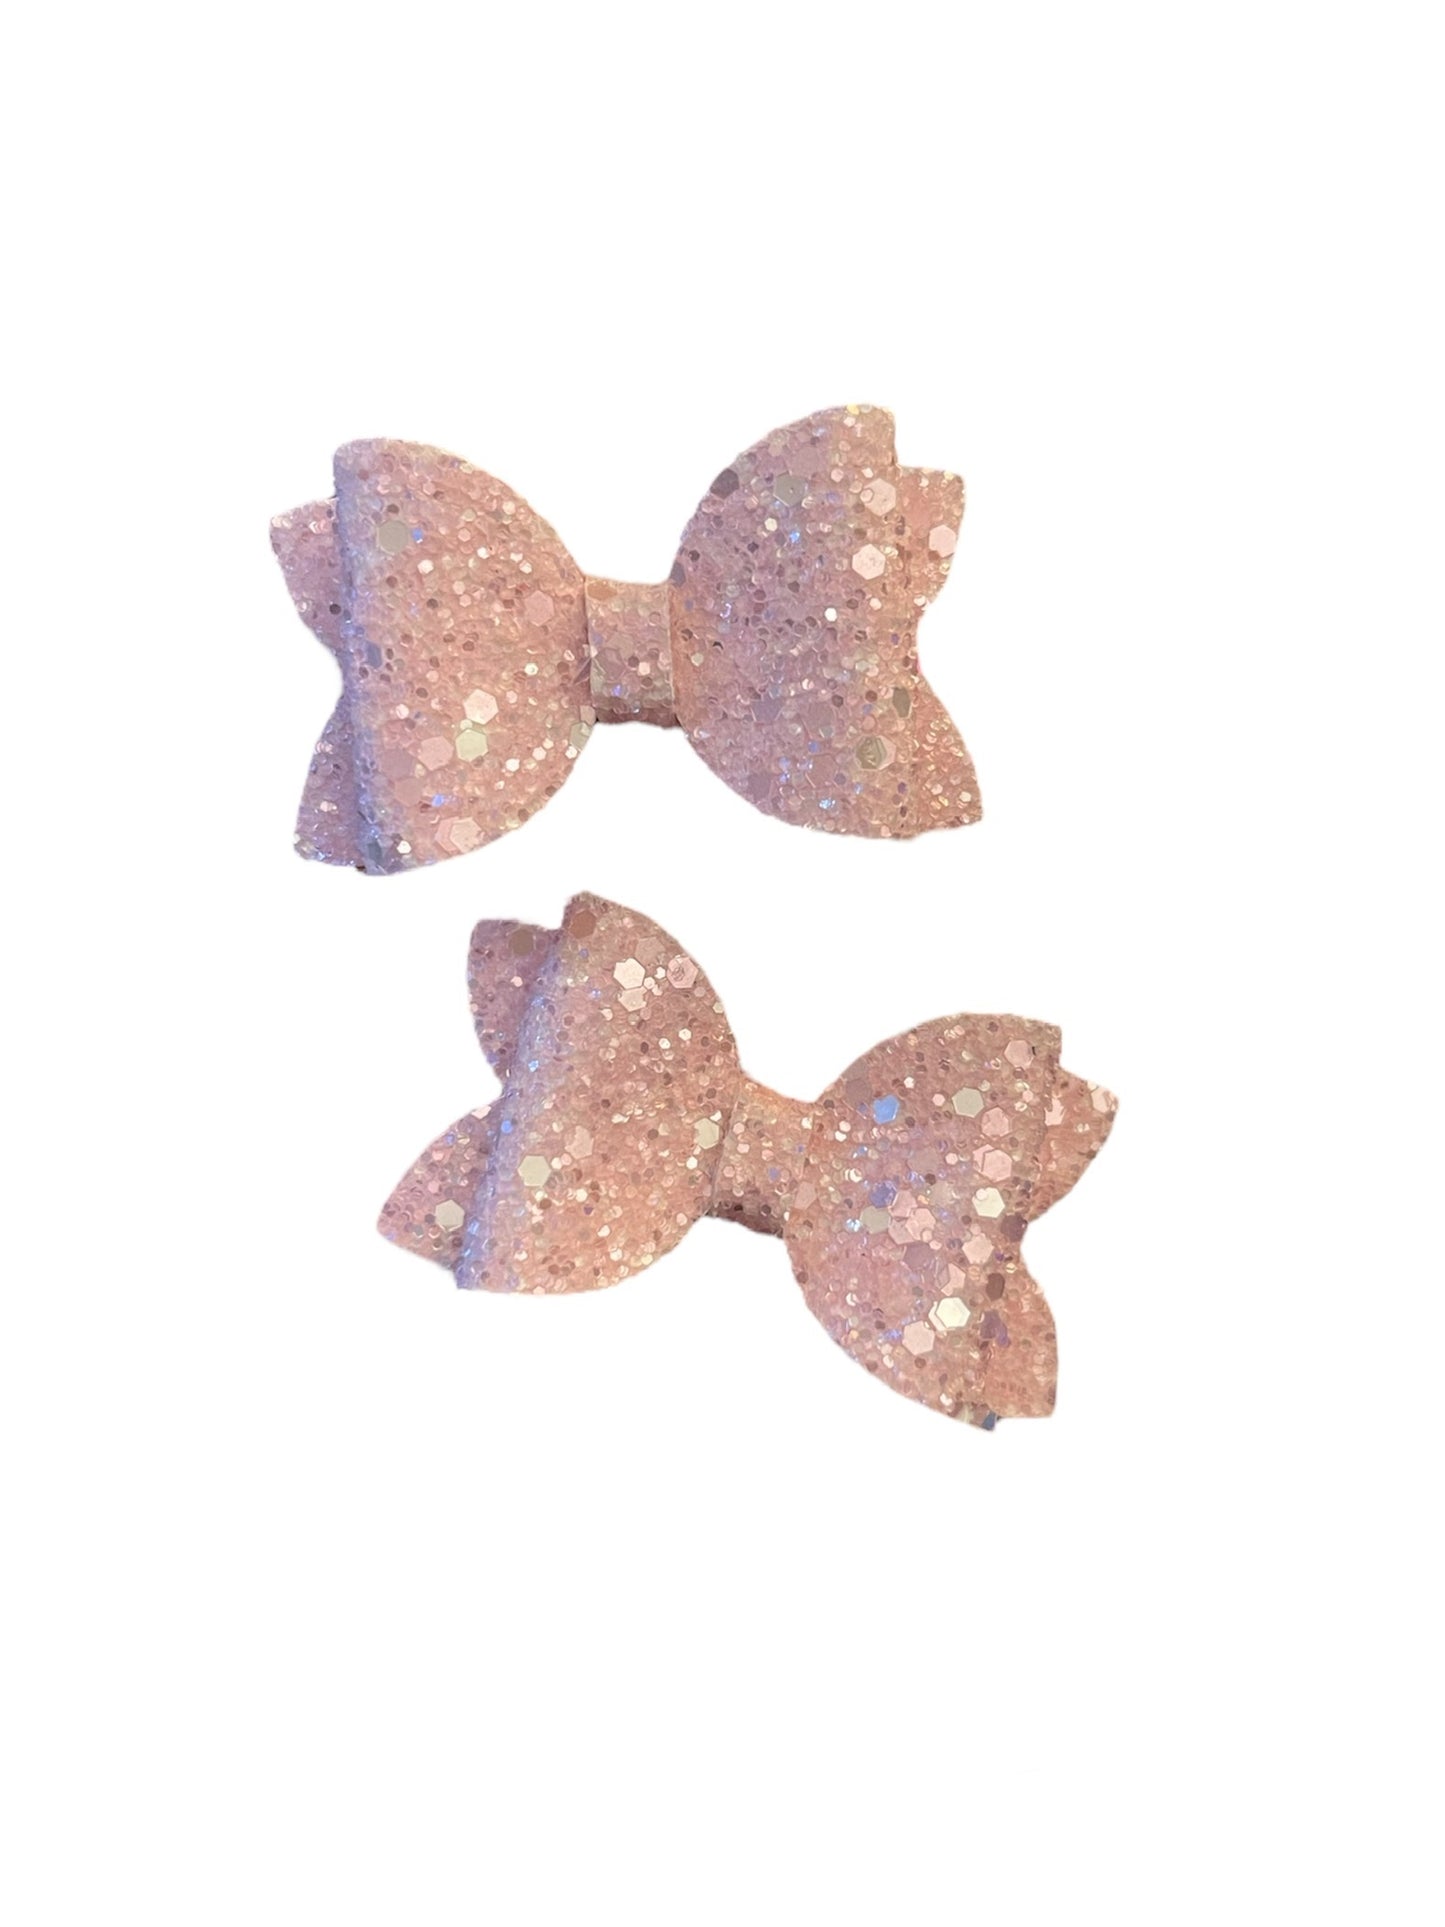 Light Pink Glitter Pigtail Bows!